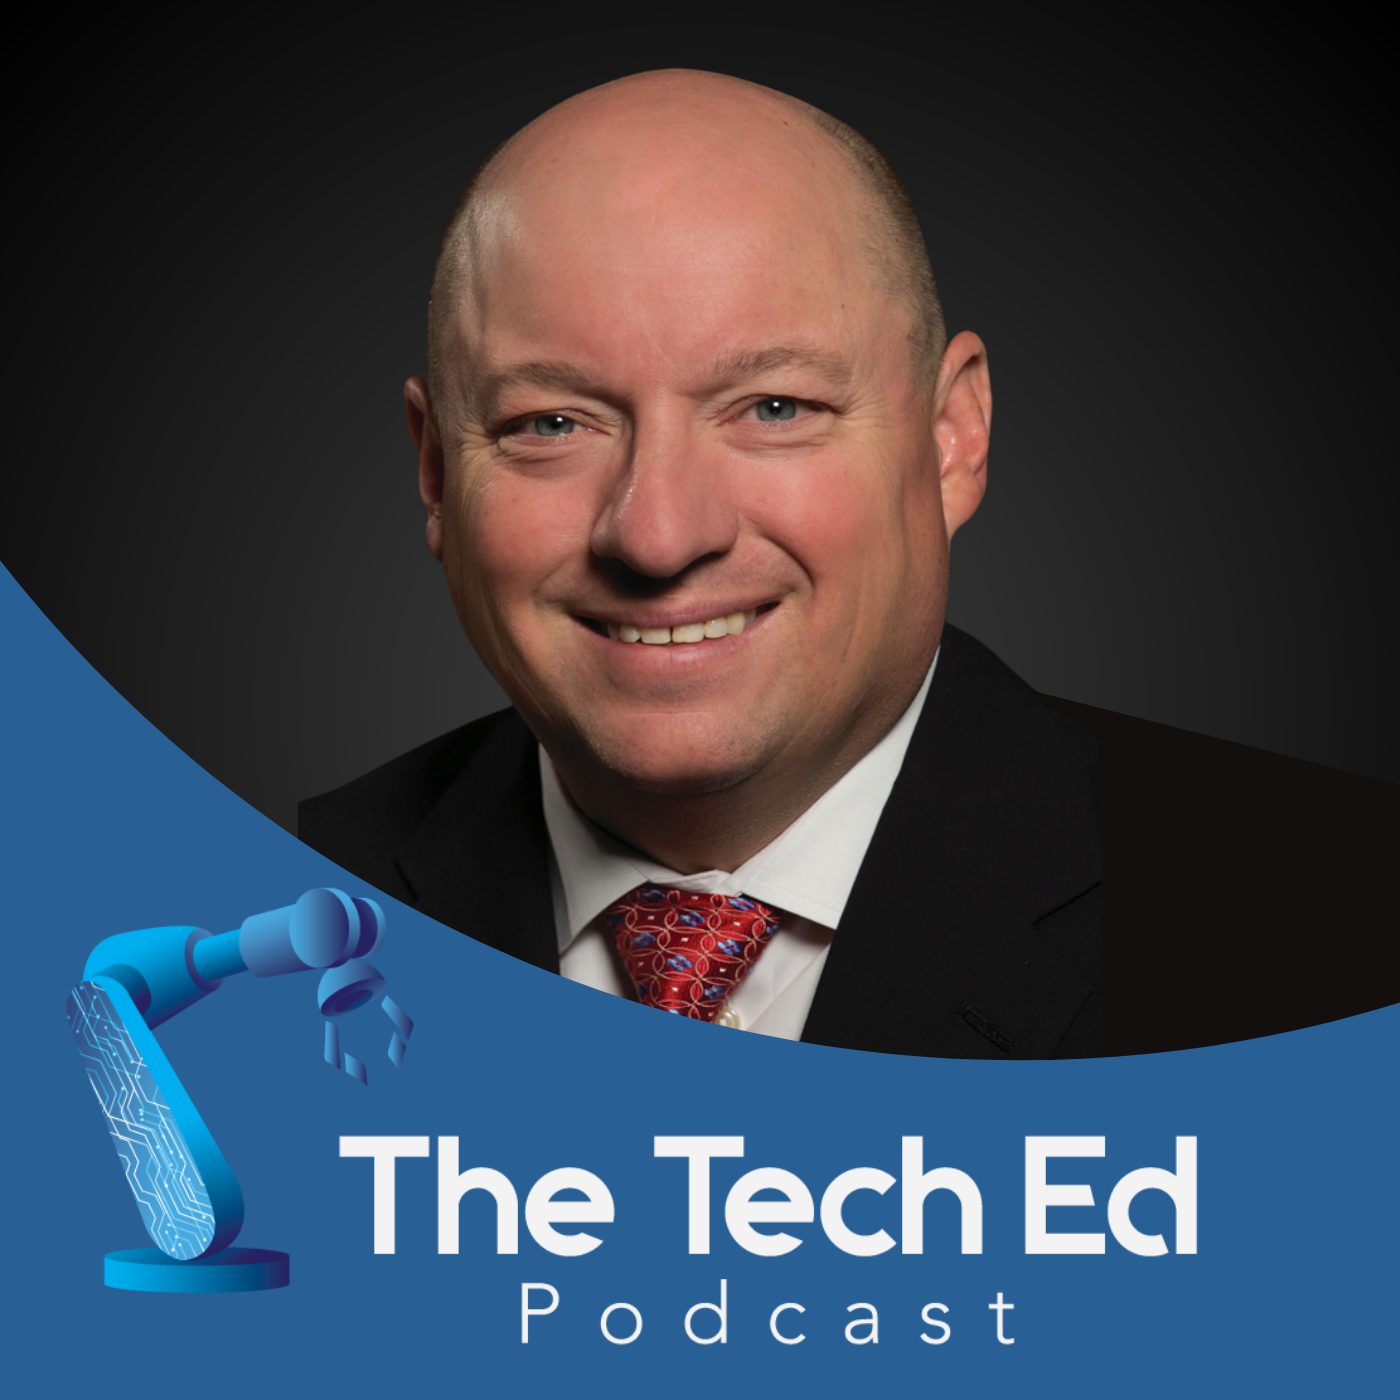 Todd Wanek on The TechEd Podcast